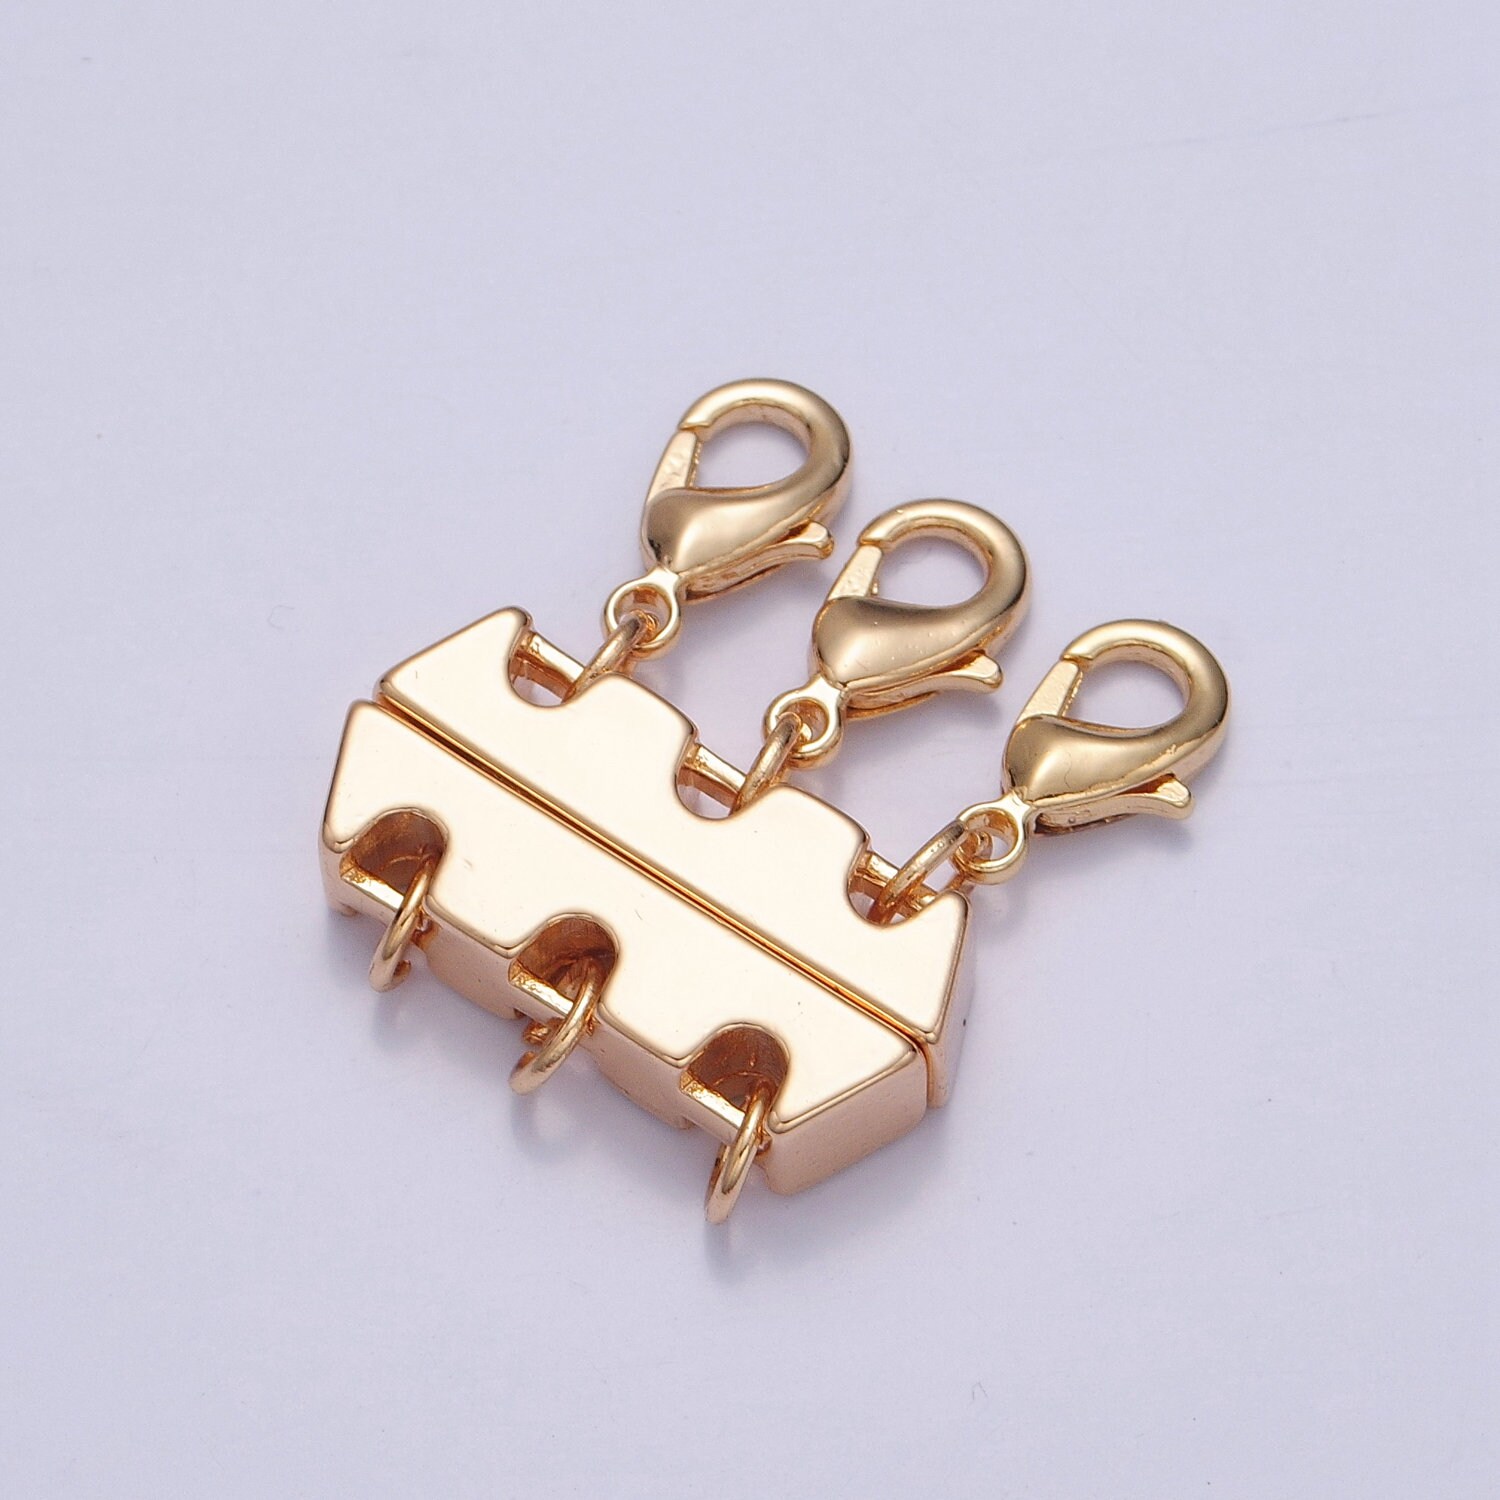 Buy Gold Layered Necklace Clasp Detangler Necklace Separator for Layering  Light Weight, Tangle Free and Tarnish Free L-780 L-781 Online in India 